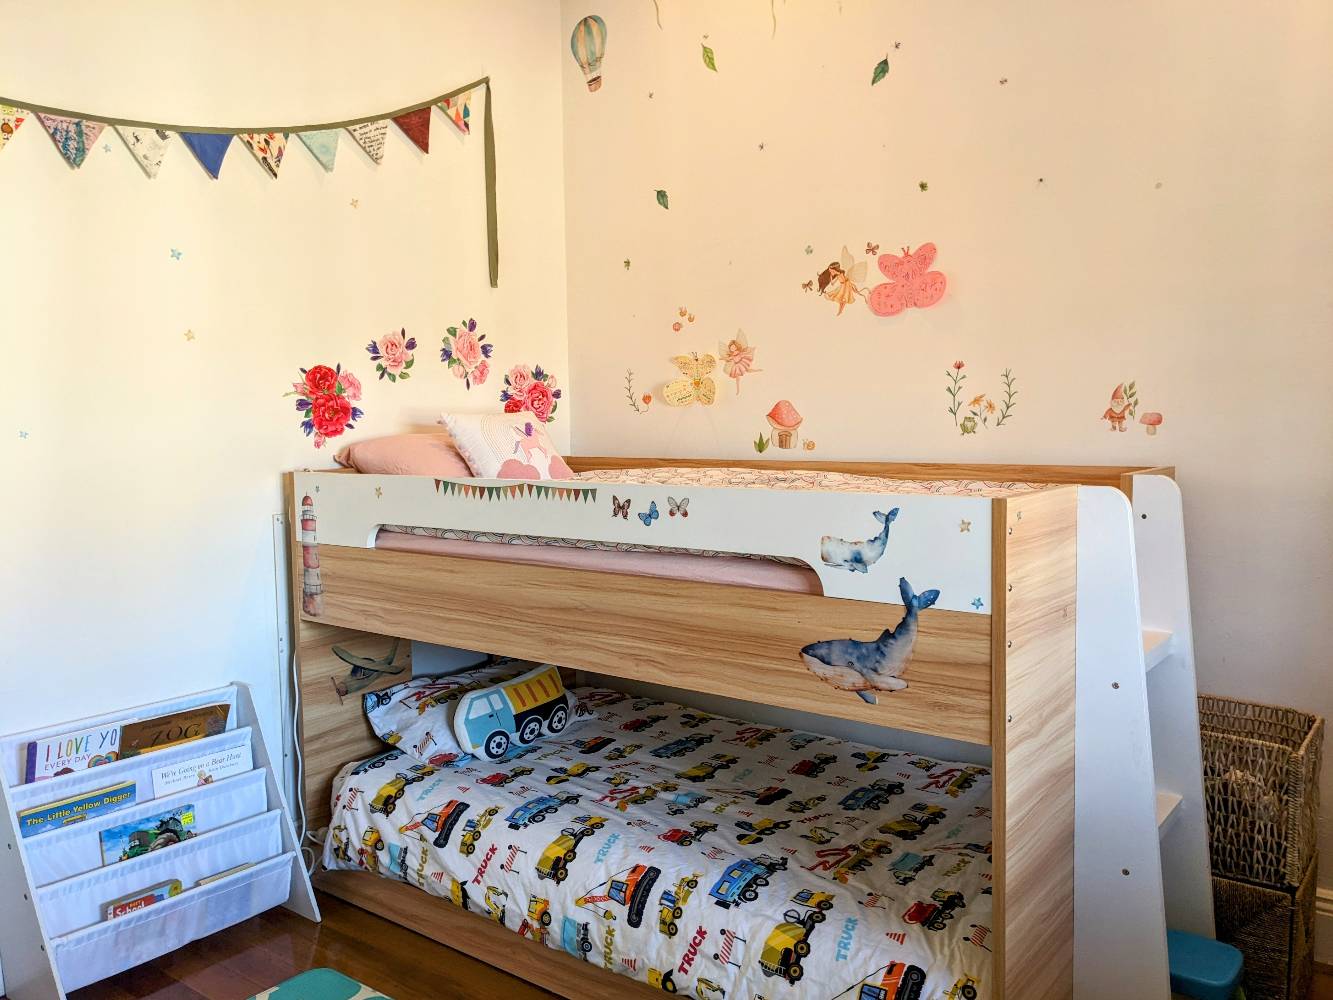 Low lying bunk beds in kids room (top bunk is chest height for an adult), ceiling fan, large window facing street, soft play mat, toys